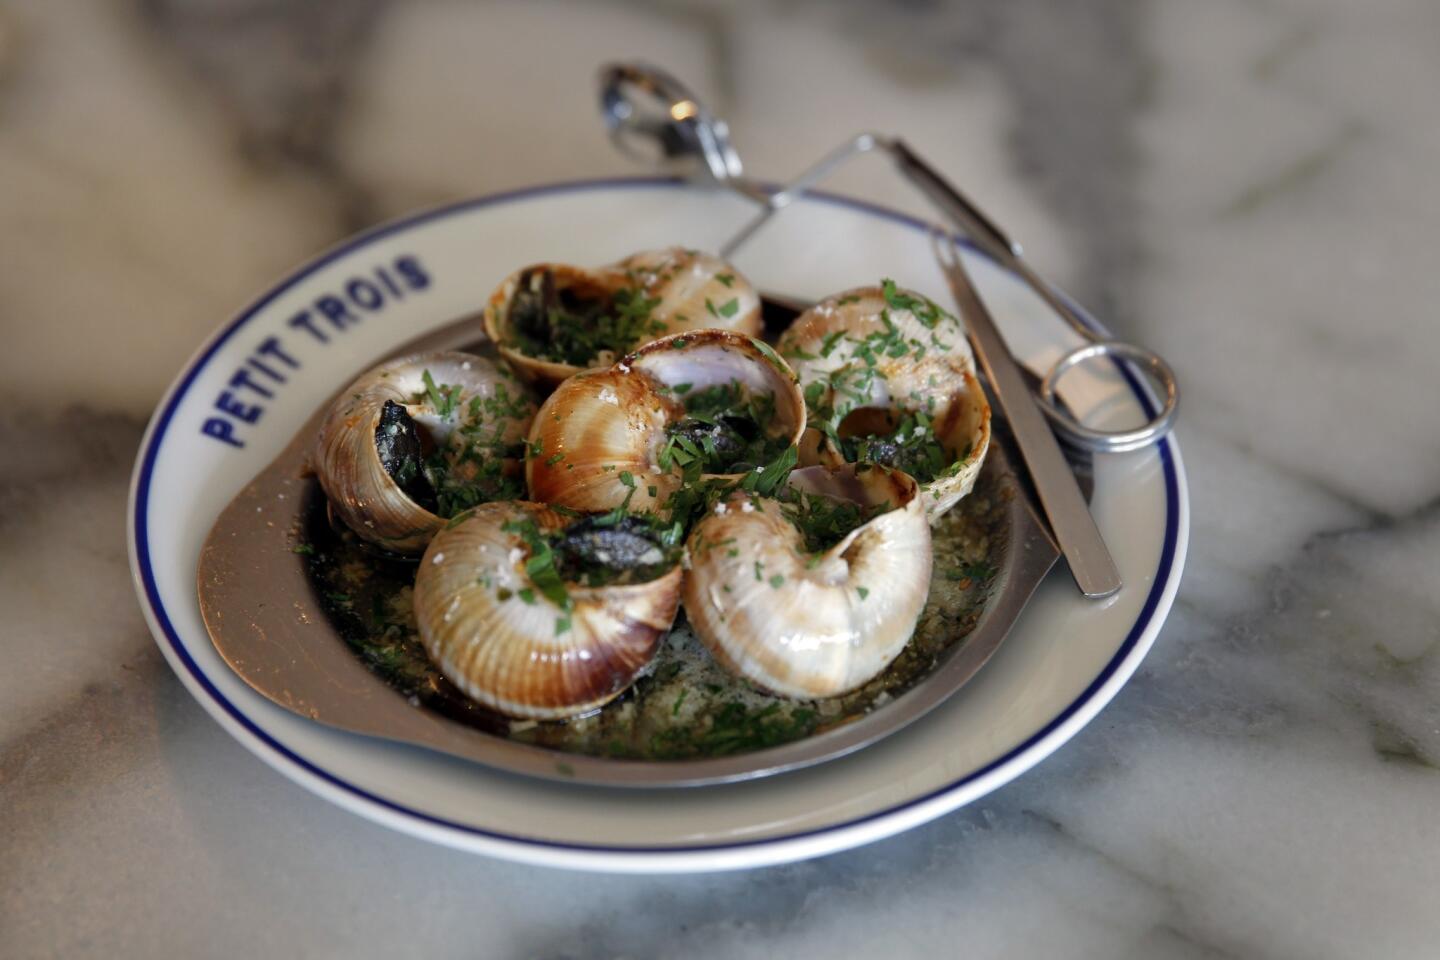 Escargot at Petit Trois may be the best you can get anywhere in Los Angeles.